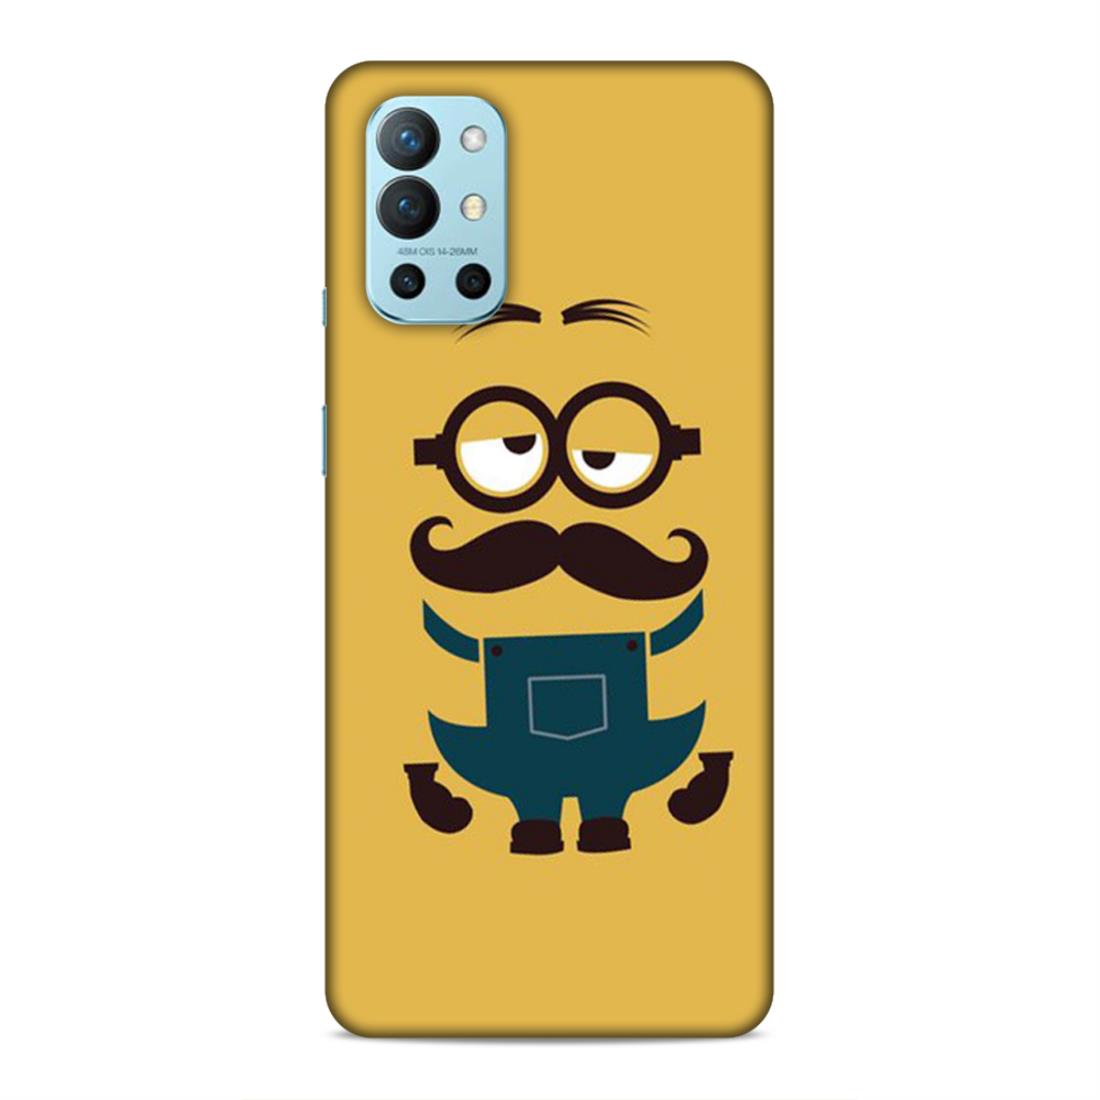 Minion Hard Back Case For OnePlus 8T / 9R